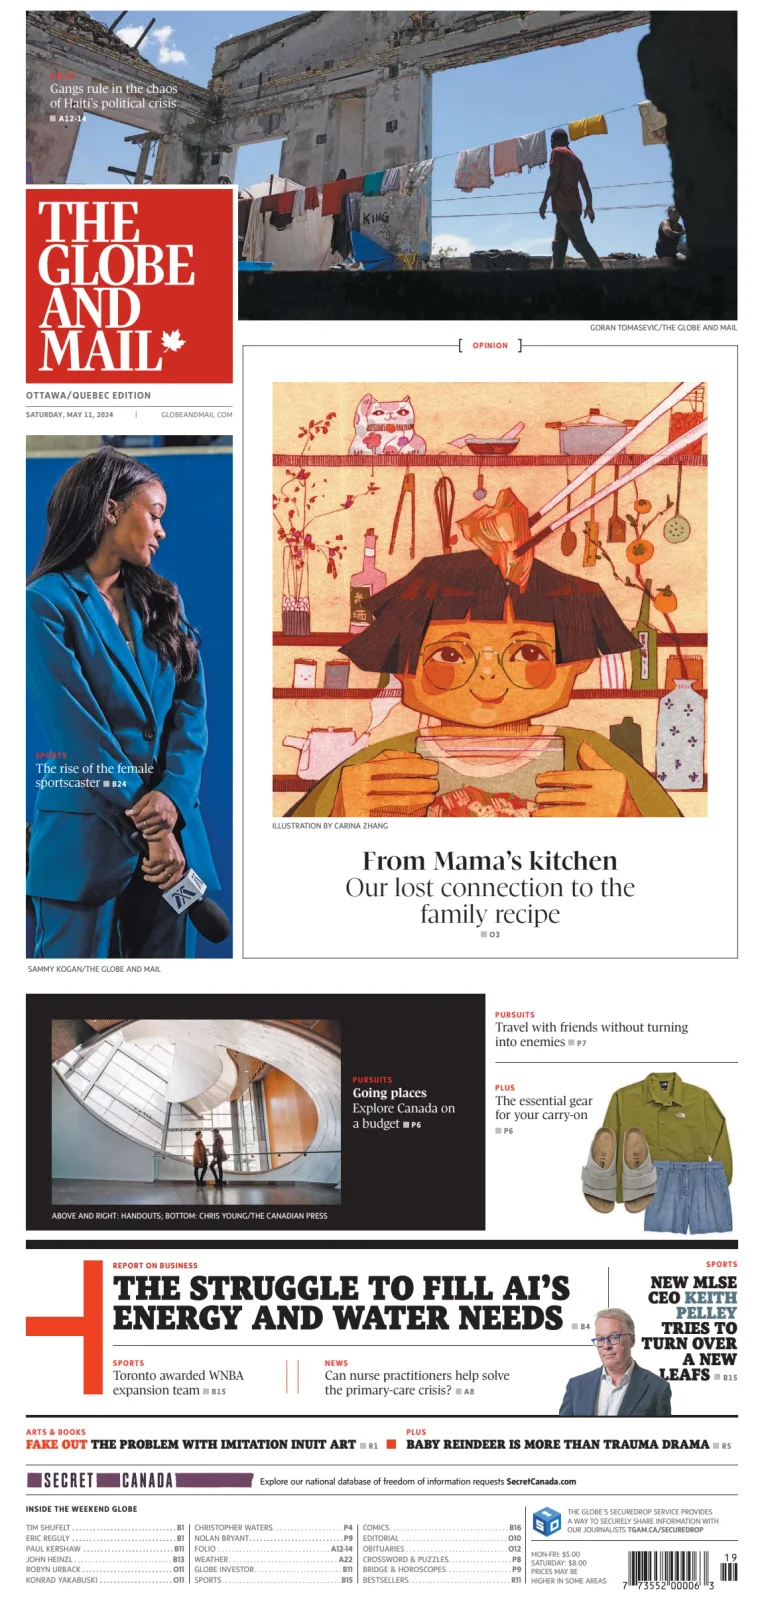 The Globe and Mail (Ottawa/Quebec Edition)